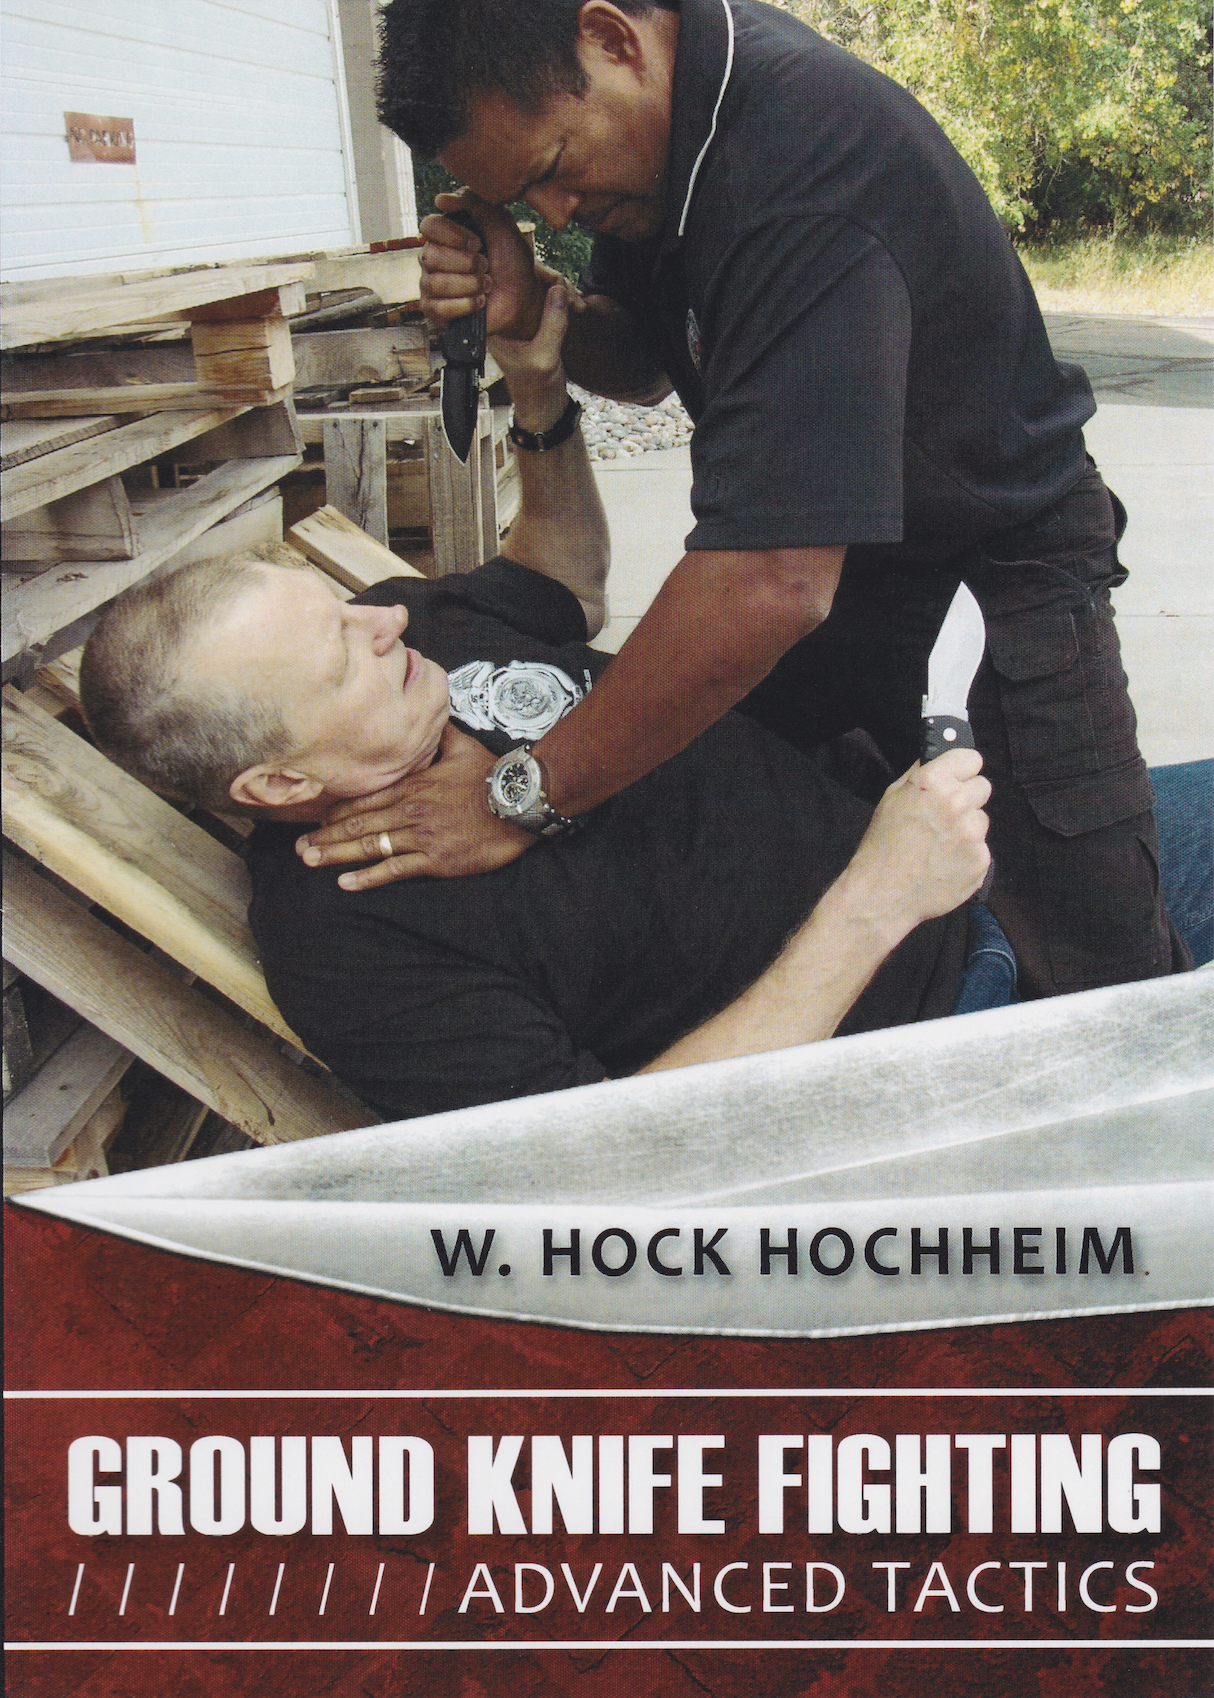 Ground Knife Fighting Advanced Tactics 2 DVD Set by Hock Hochheim (Preowned)